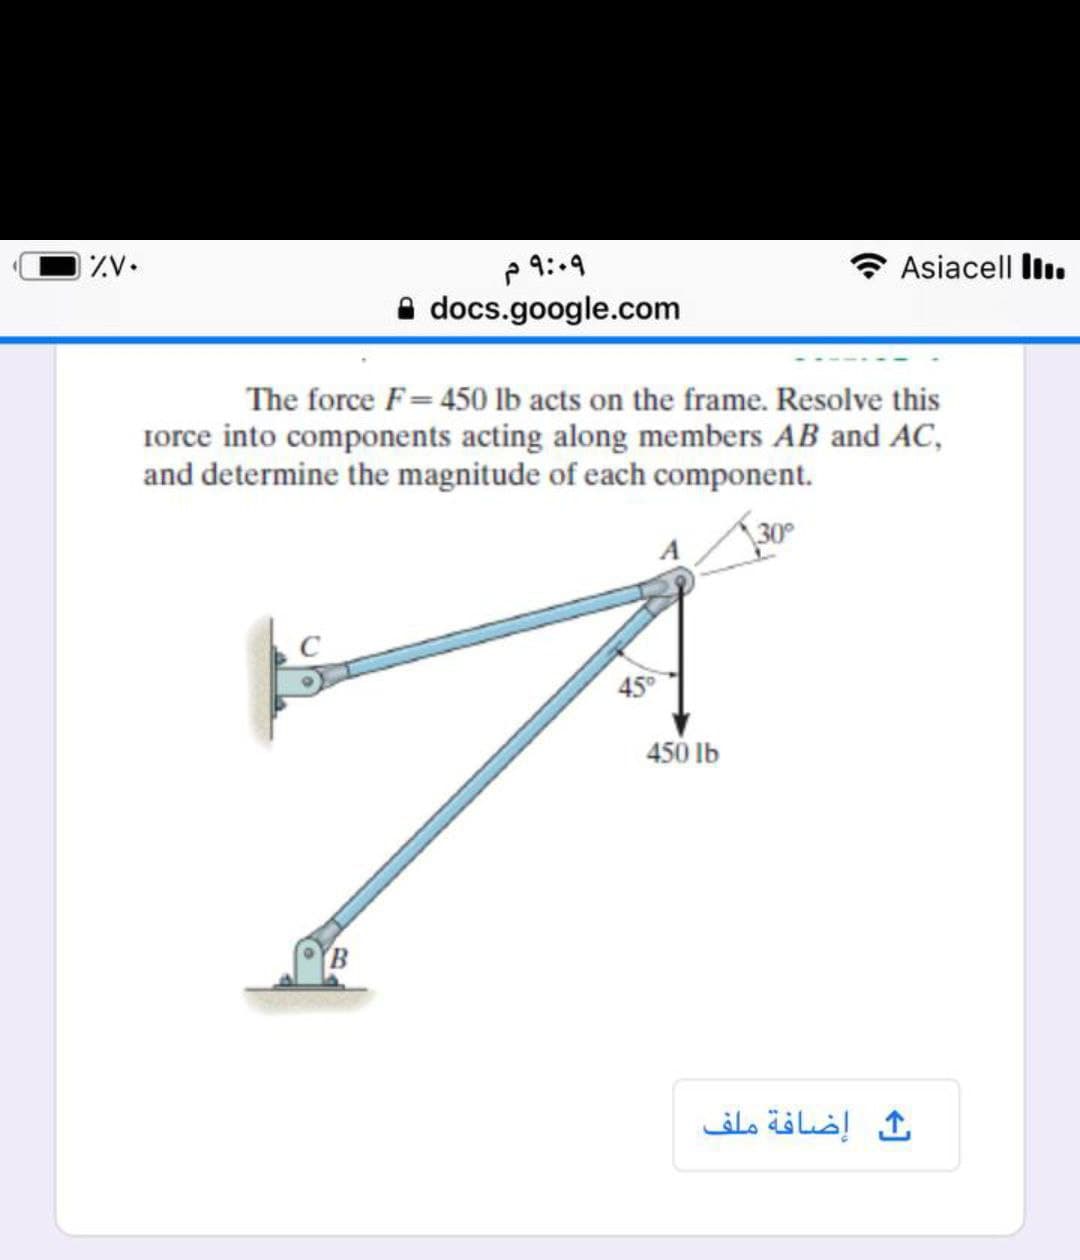 ZV.
p 9:-9
A docs.google.com
* Asiacell liı.
The force F= 450 lb acts on the frame. Resolve this
Iorce into components acting along members AB and AC,
and determine the magnitude of each component.
30
45
450 lb
إضافة ملف
